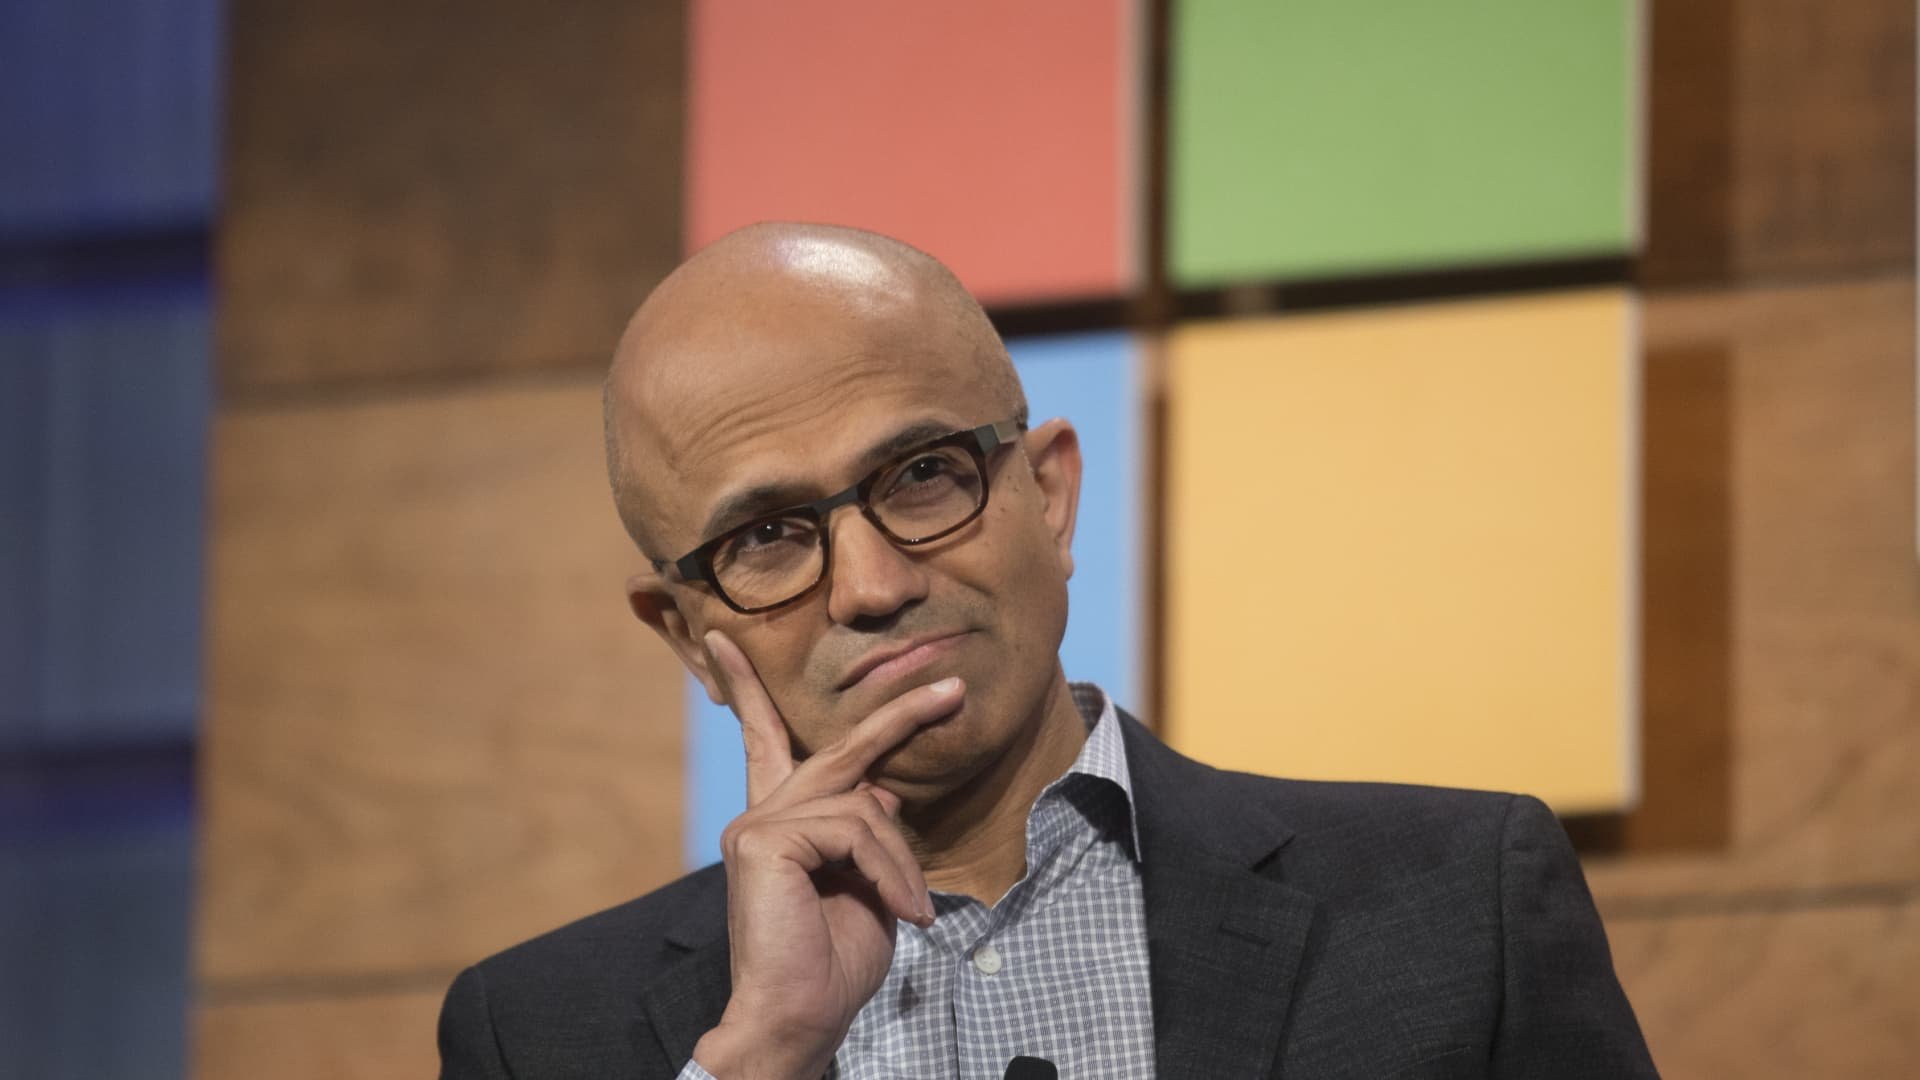 Microsoft hires law firm to review sexual harassment policies, with report due in the spring